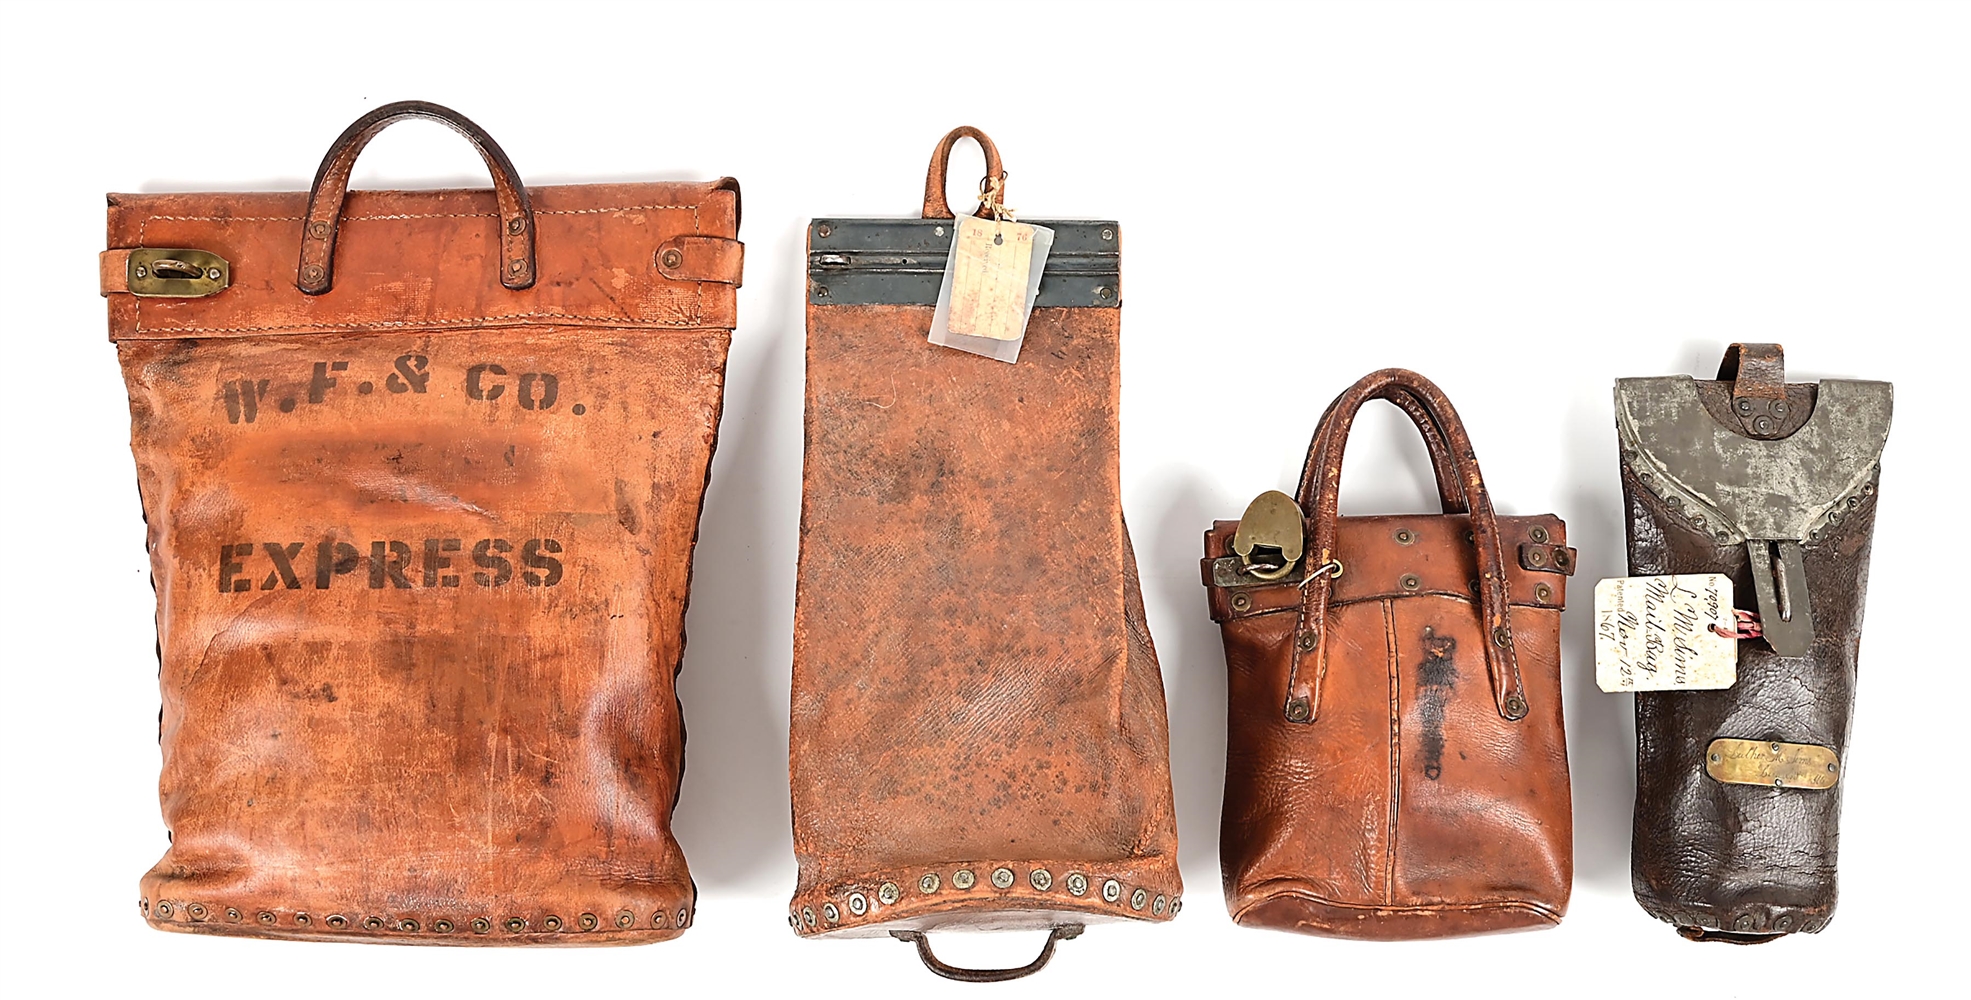 LOT OF 4: WELLS FARGO LEATHER MONEY / MAIL BAGS.